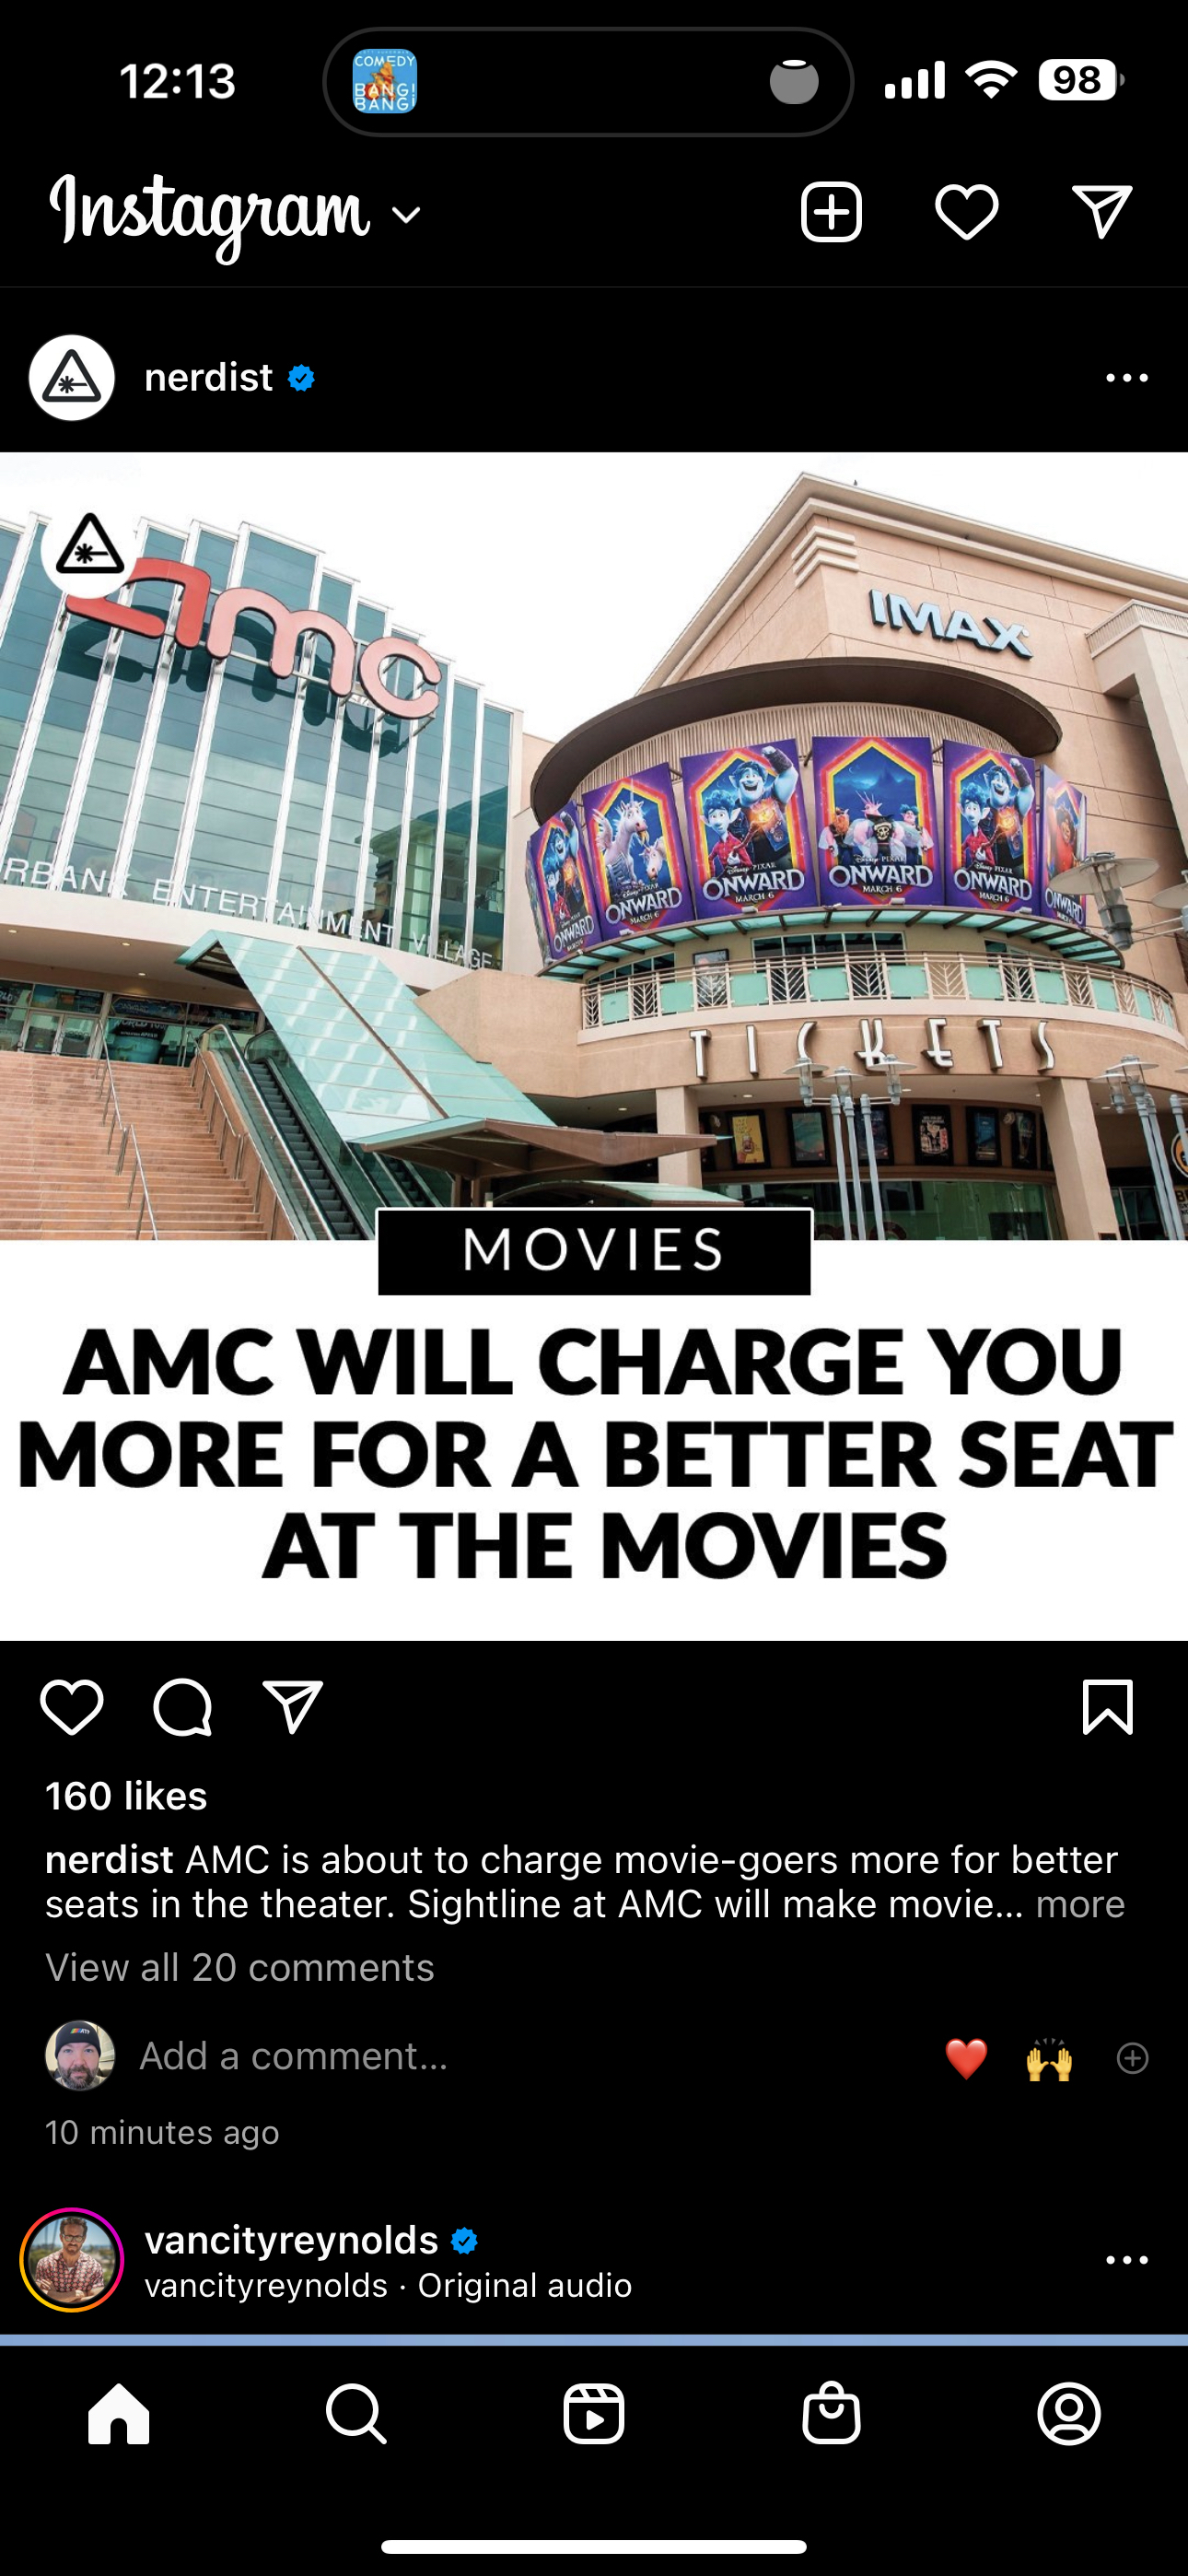 AMC will charge more for better seats